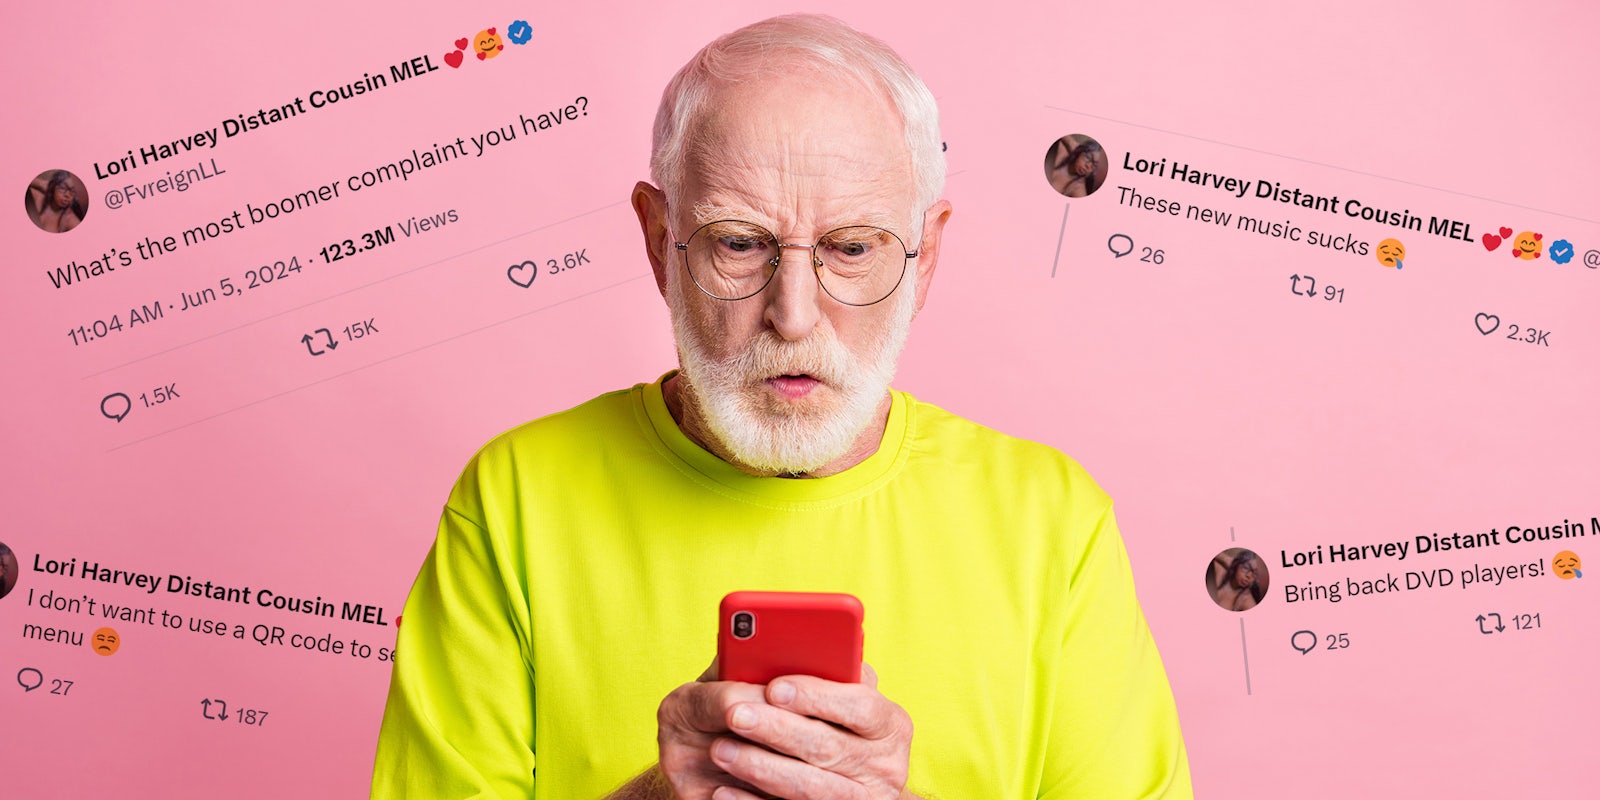 man holding phone with tweets in background